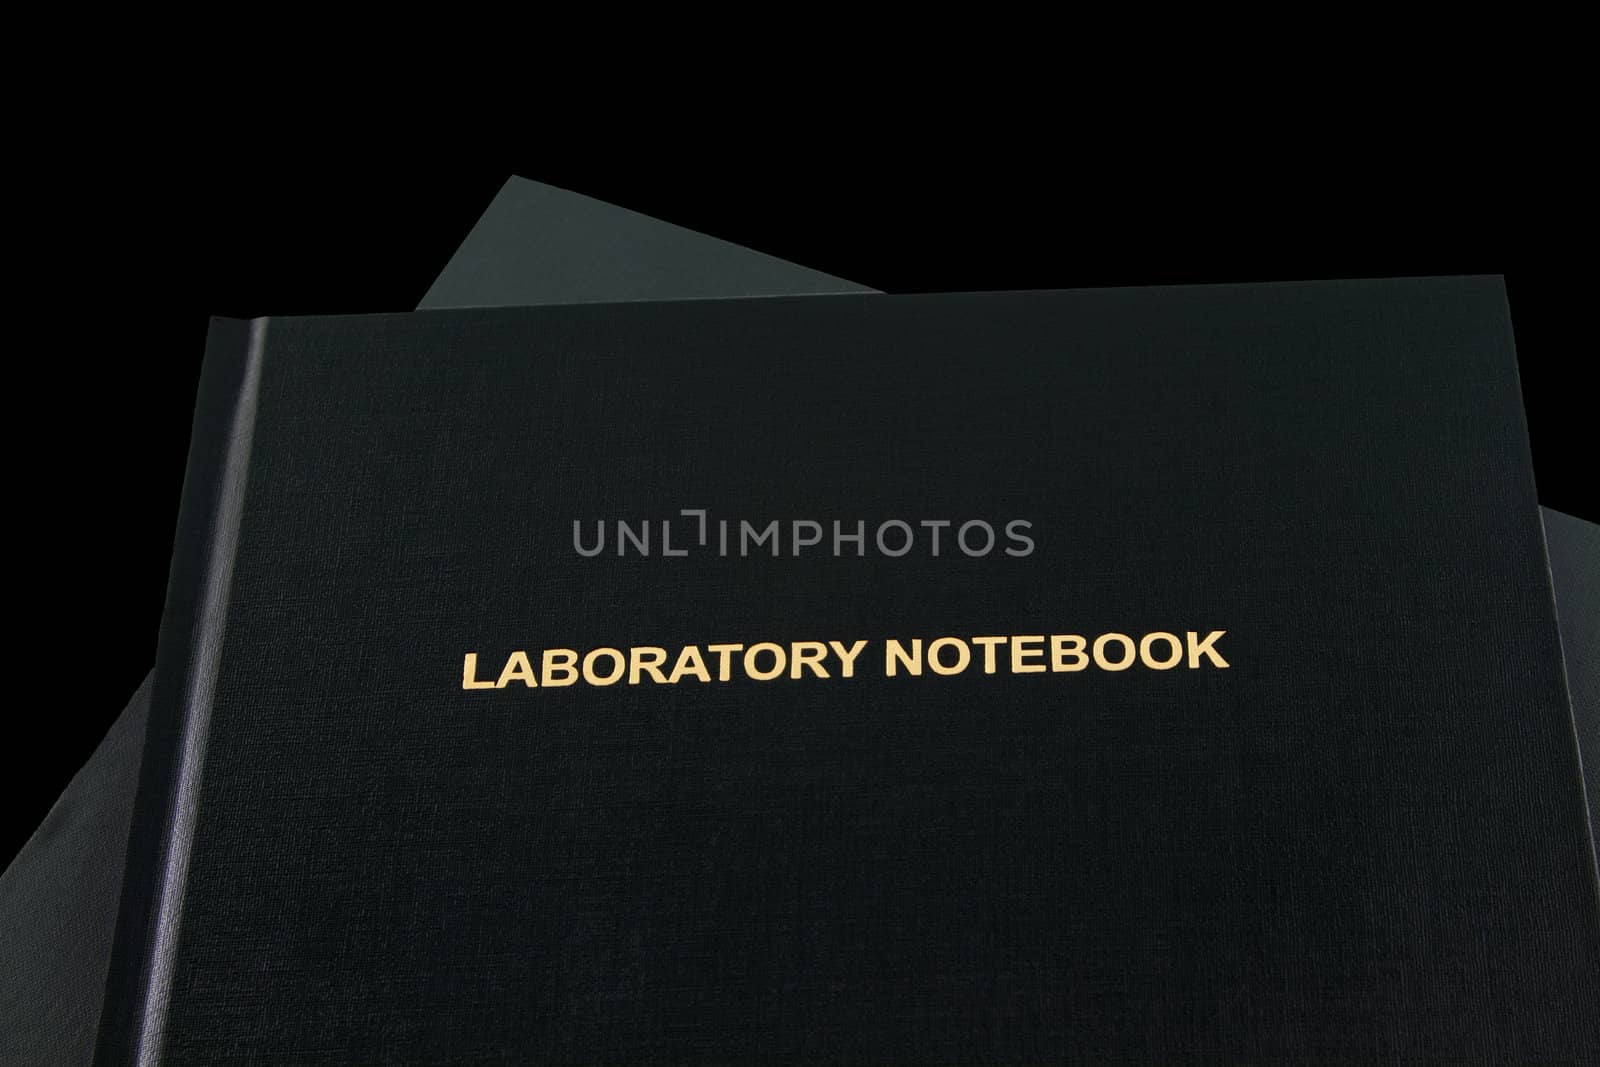 Science, technology, engineering and math studies depicted with two laboratory notebooks with gold lettering visible on one; needed national skills and education initiative emphasis; 